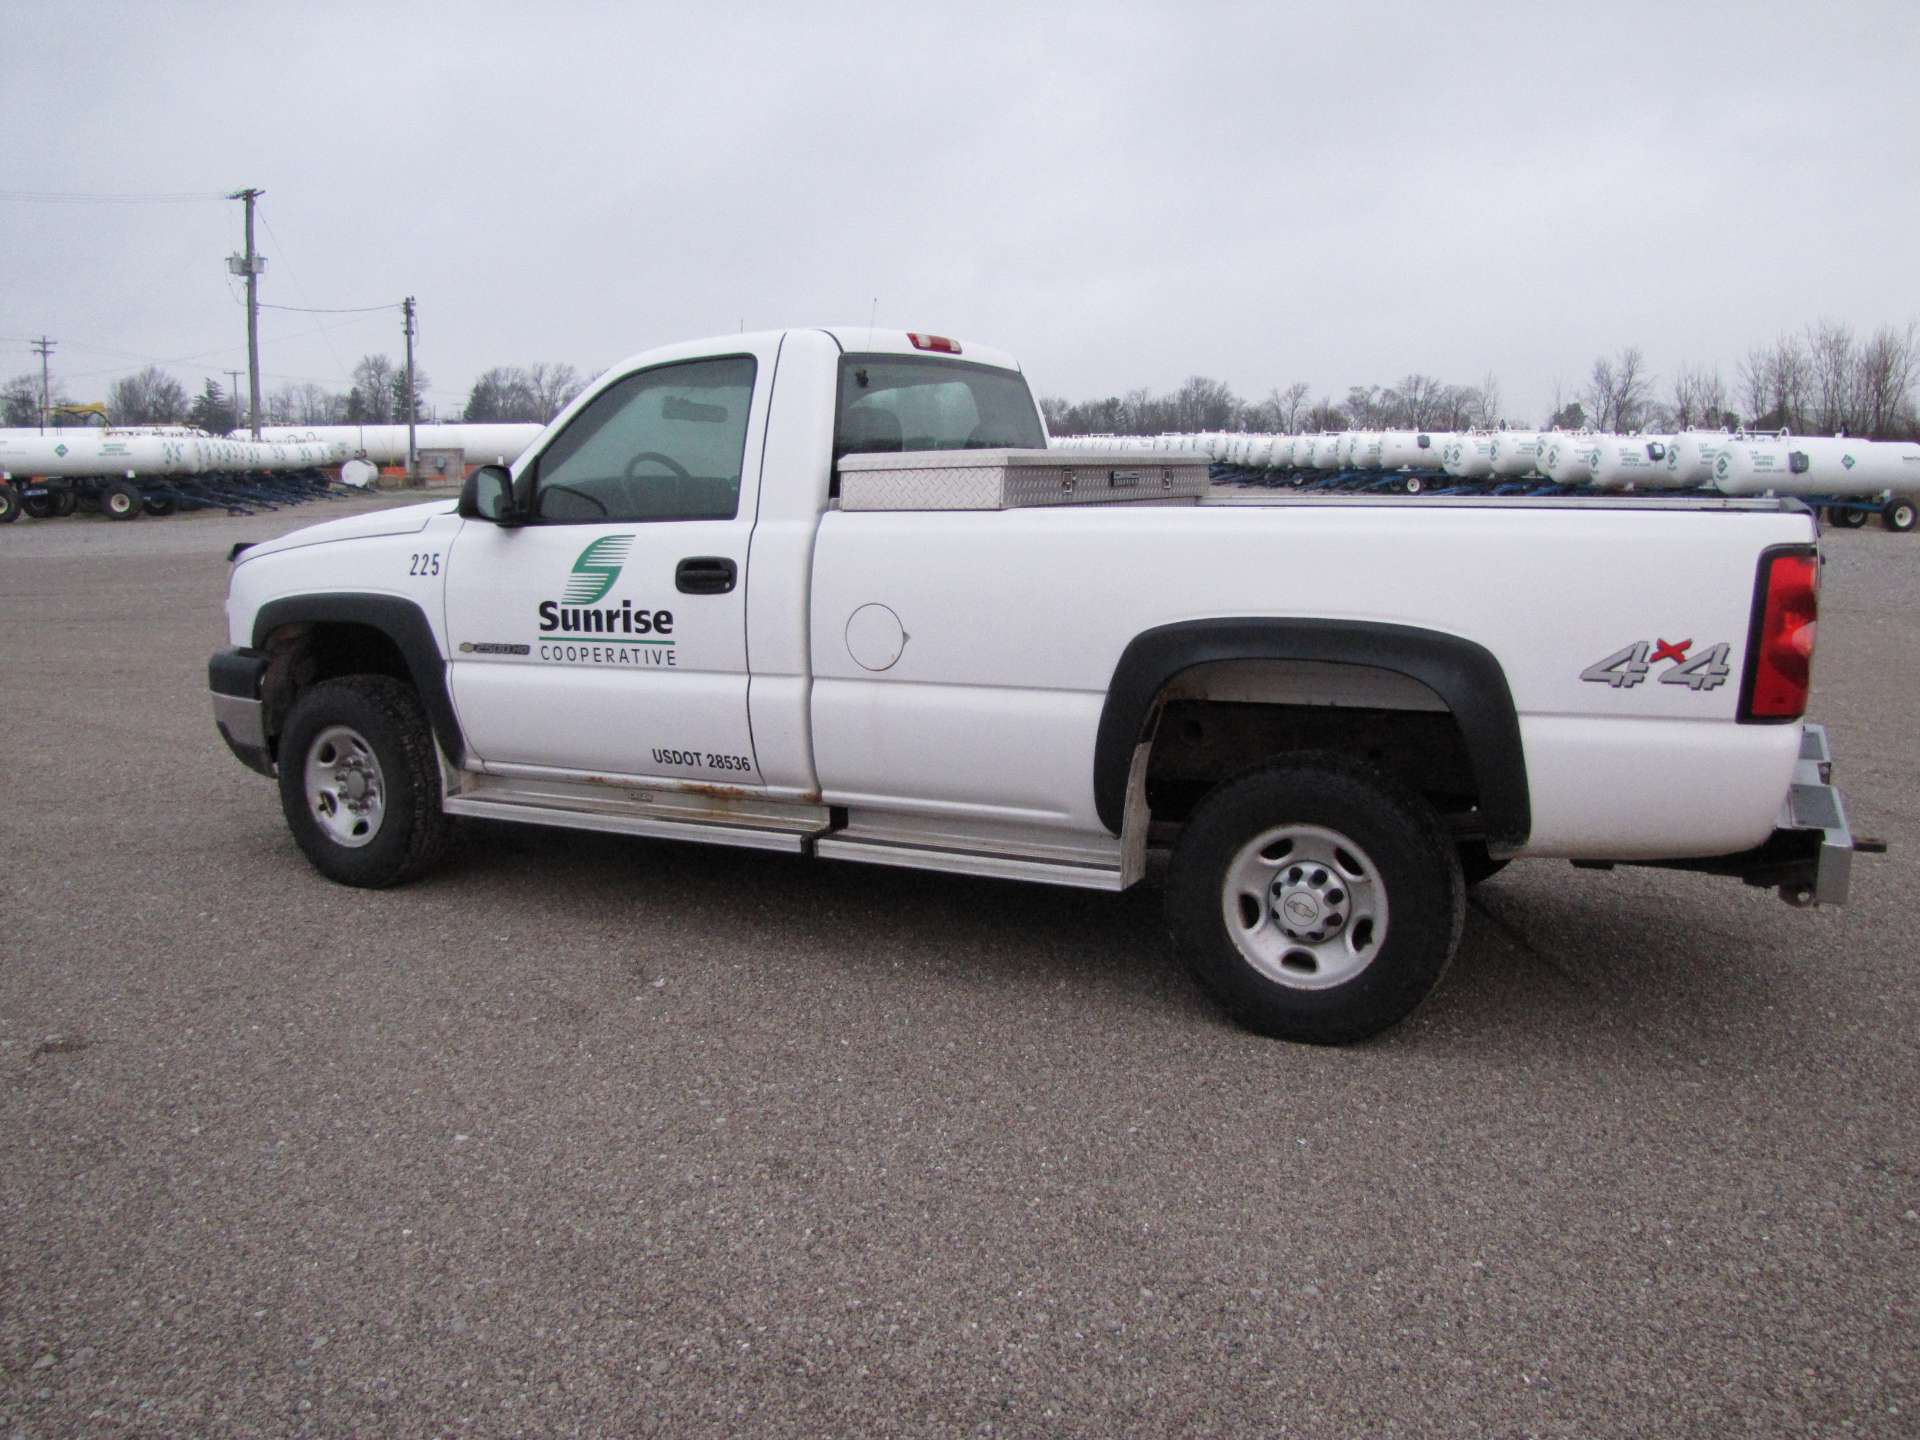 2006 Chevy 2500 HD pickup truck - Image 4 of 65